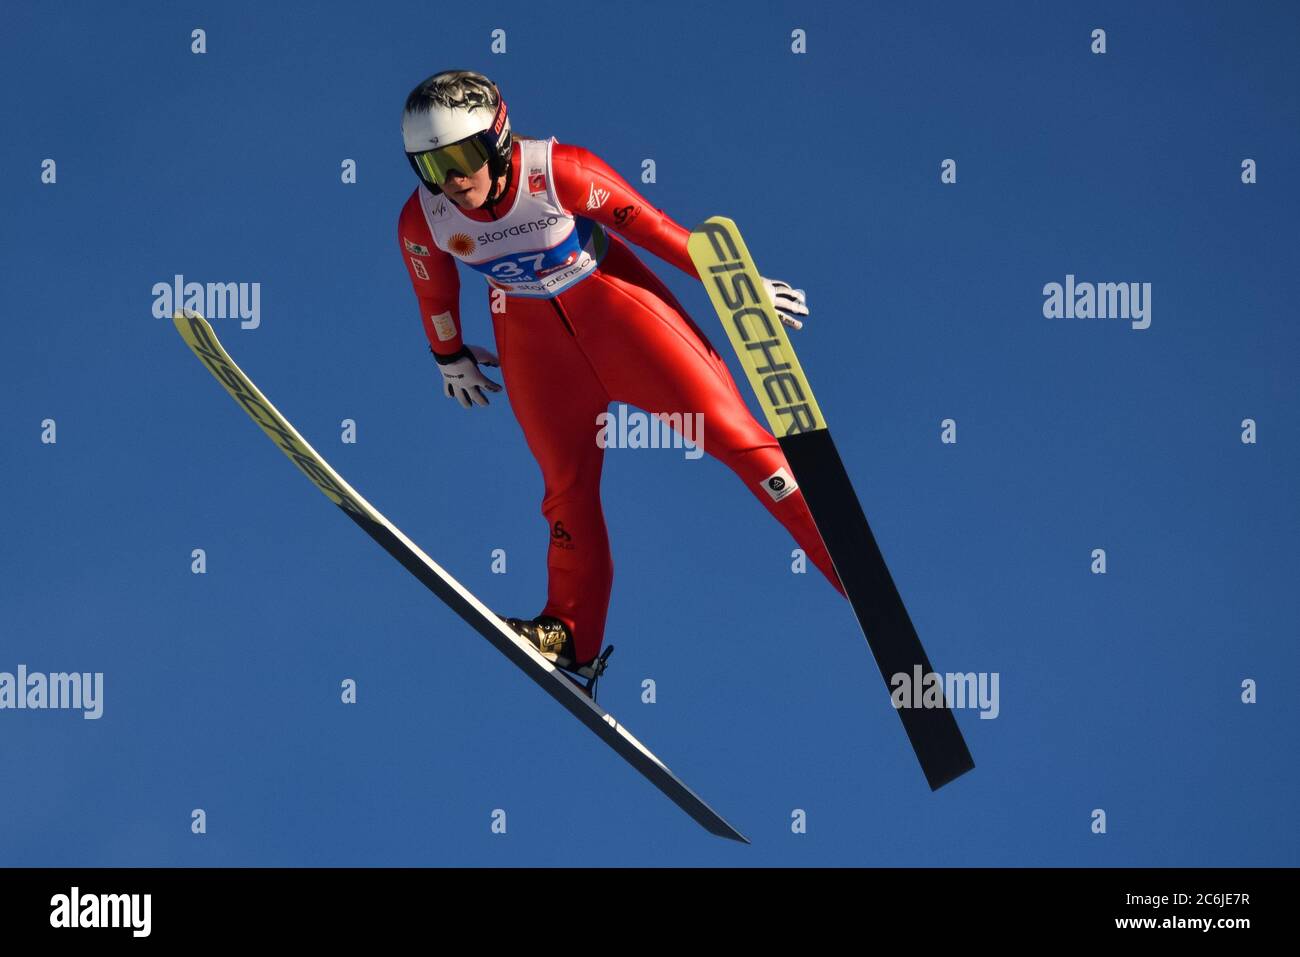 Ski jumpers jump from the large hill at the Nordic World Championships, Seefeld, Austria, 2019. Stock Photo